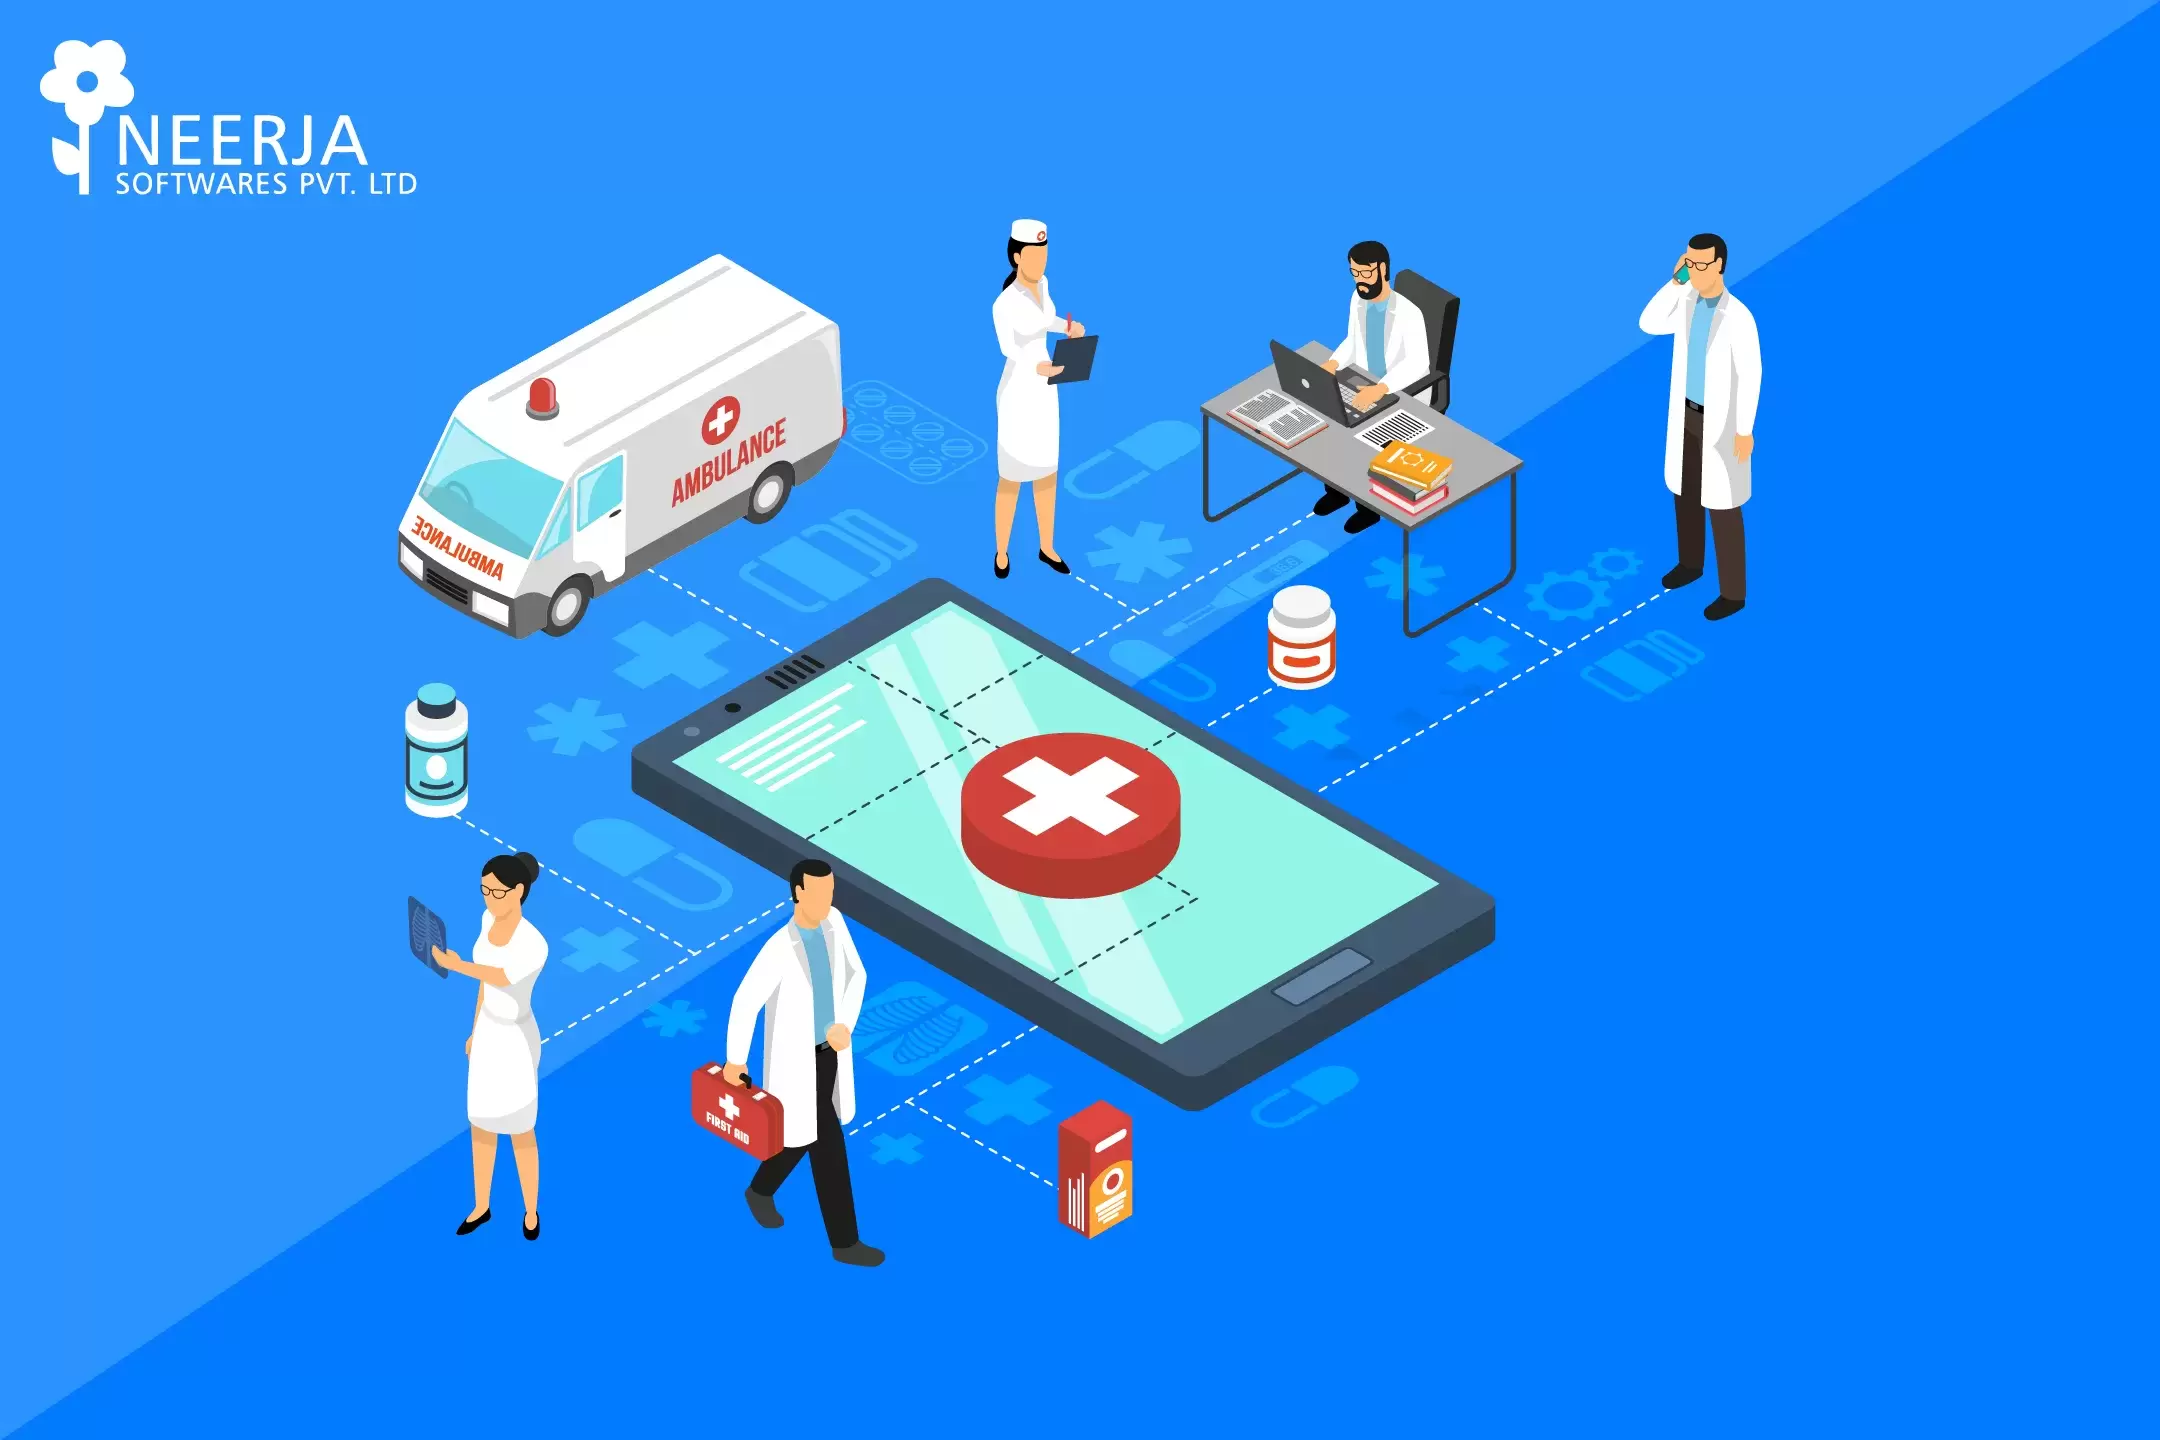 Mobile Apps transforming Healthcare Industry